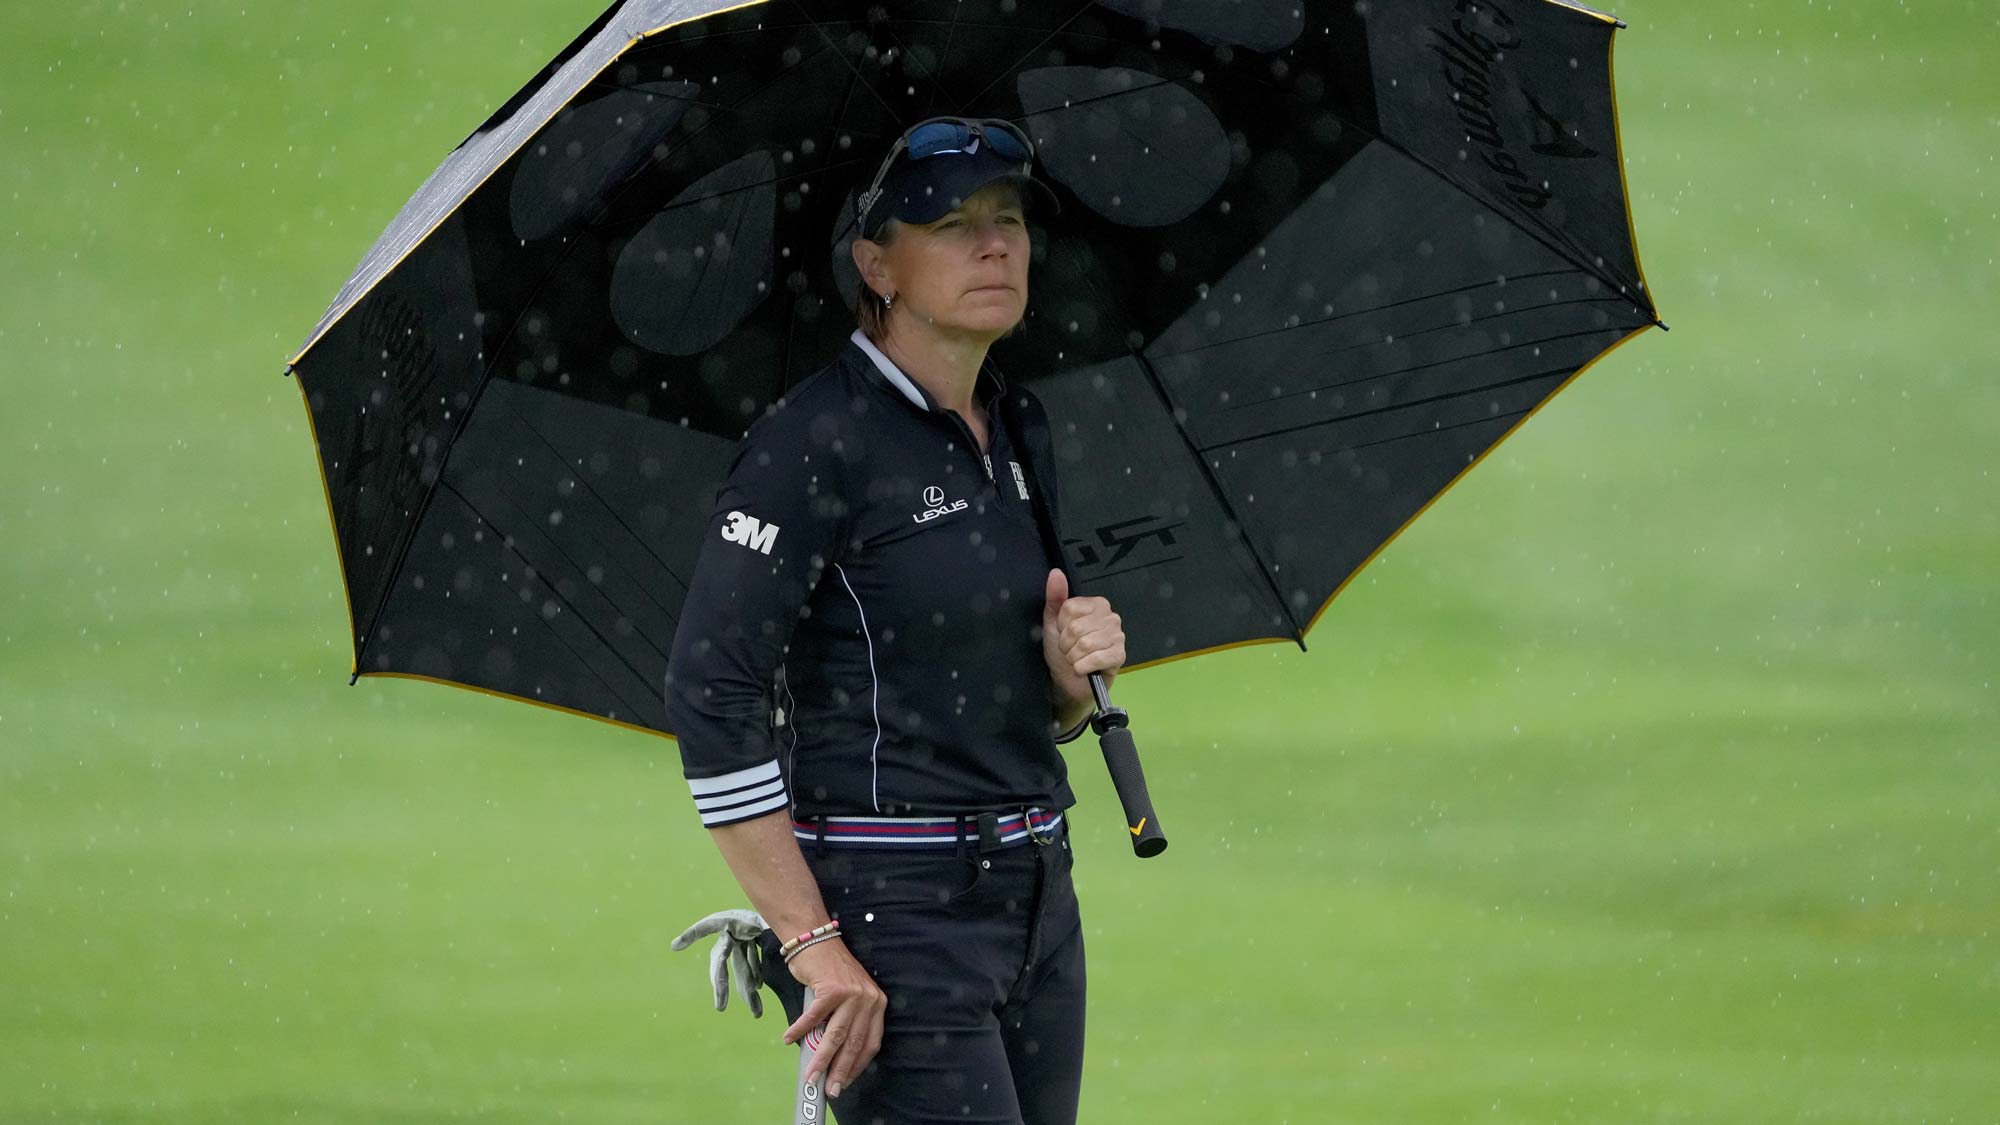 Annika Sorenstam of Sweden looks on from under an umbrella on the eighth green during the first round of the Dow Great Lakes Bay Invitational 